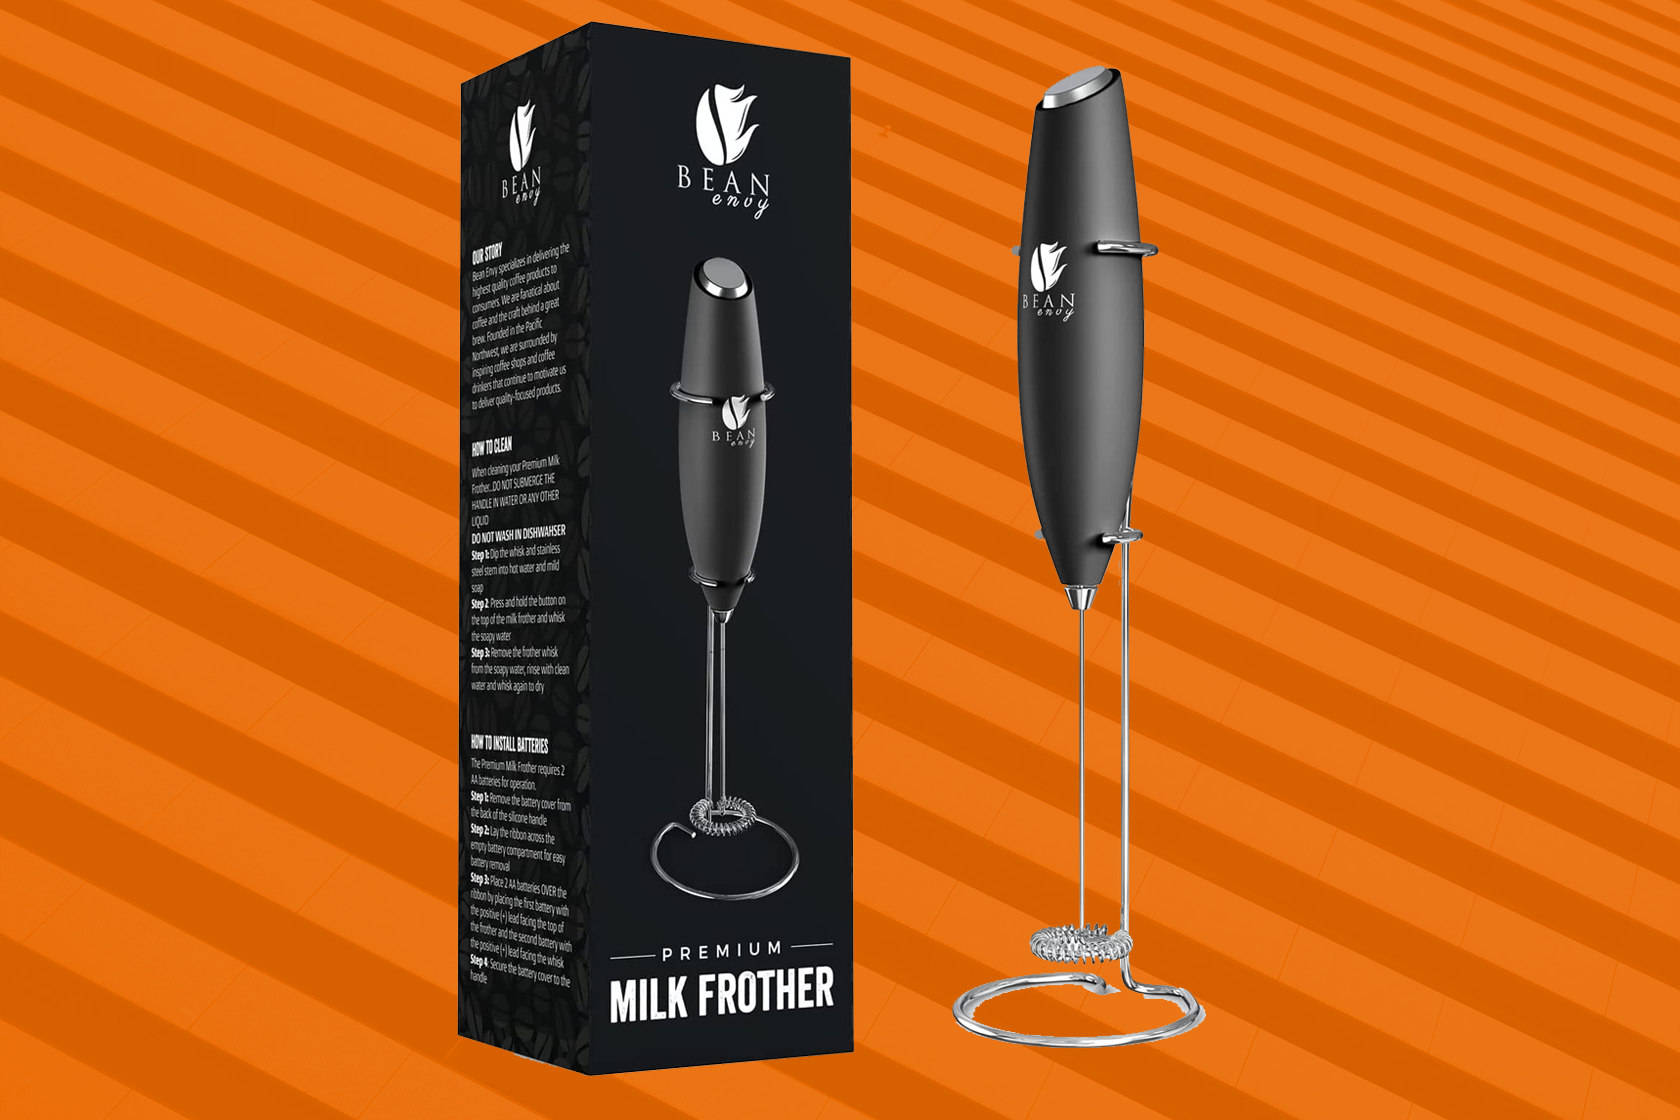 Turn yourself into a barista with this discounted milk frother